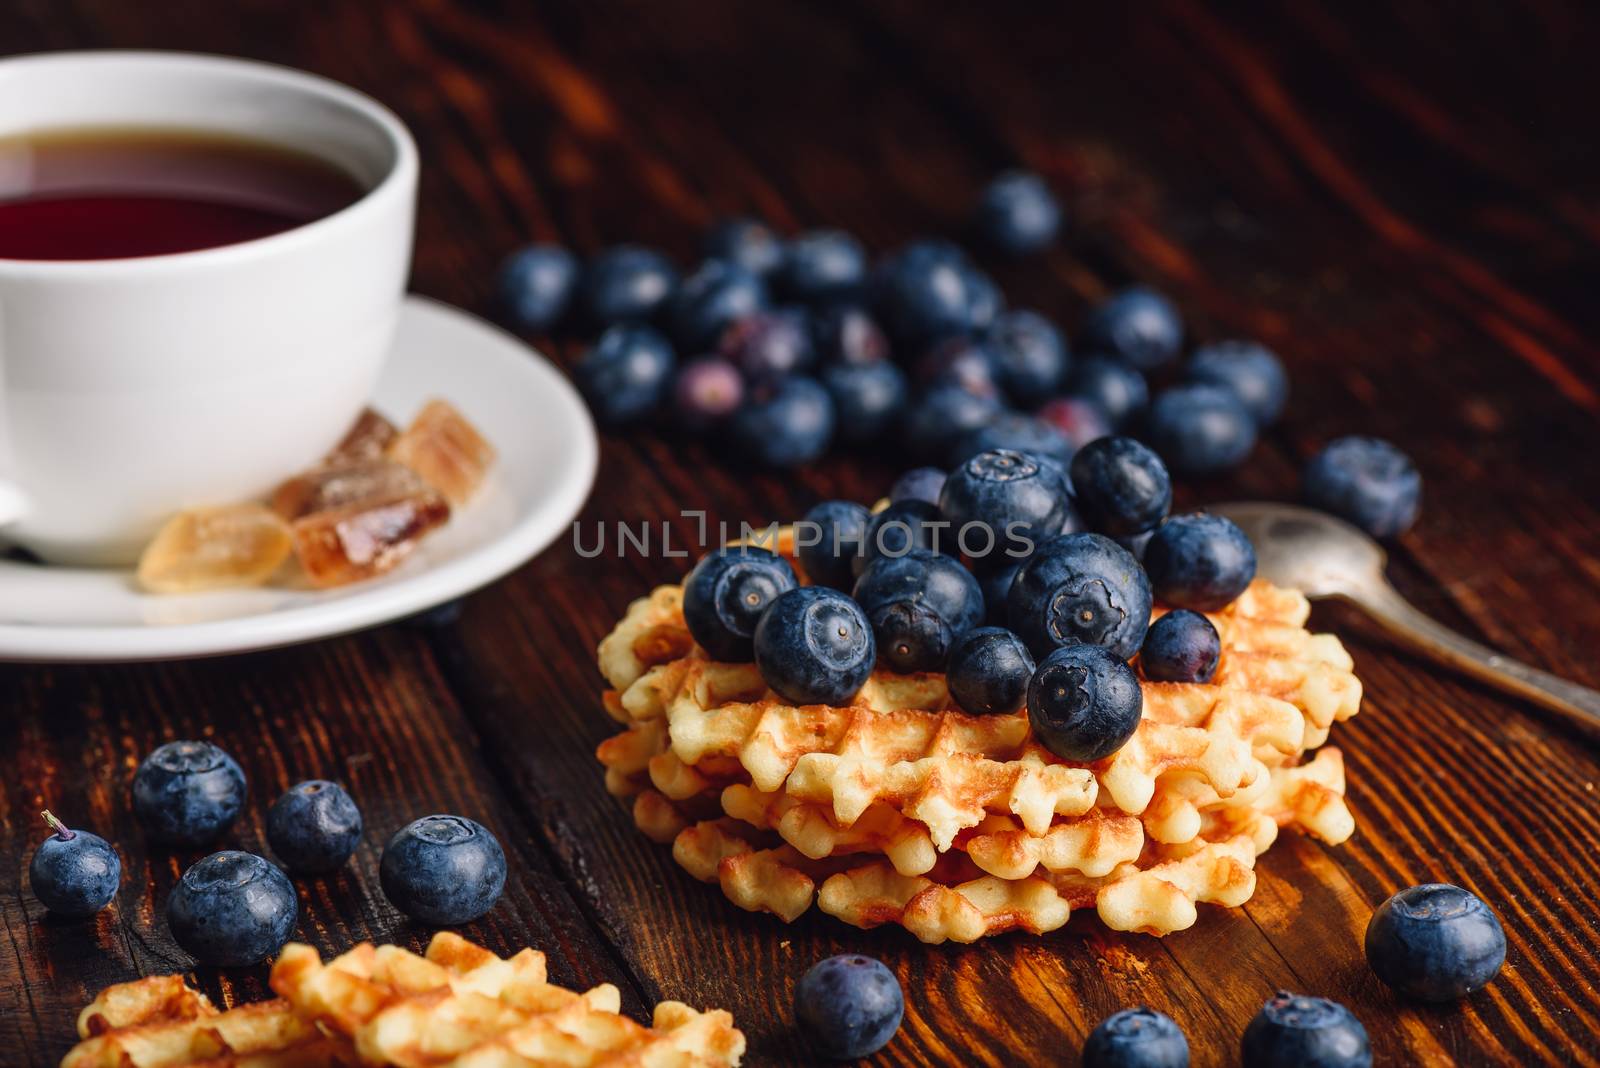 White Cup of Tea with Blueberries and Homemade Waffles for Breakfast.